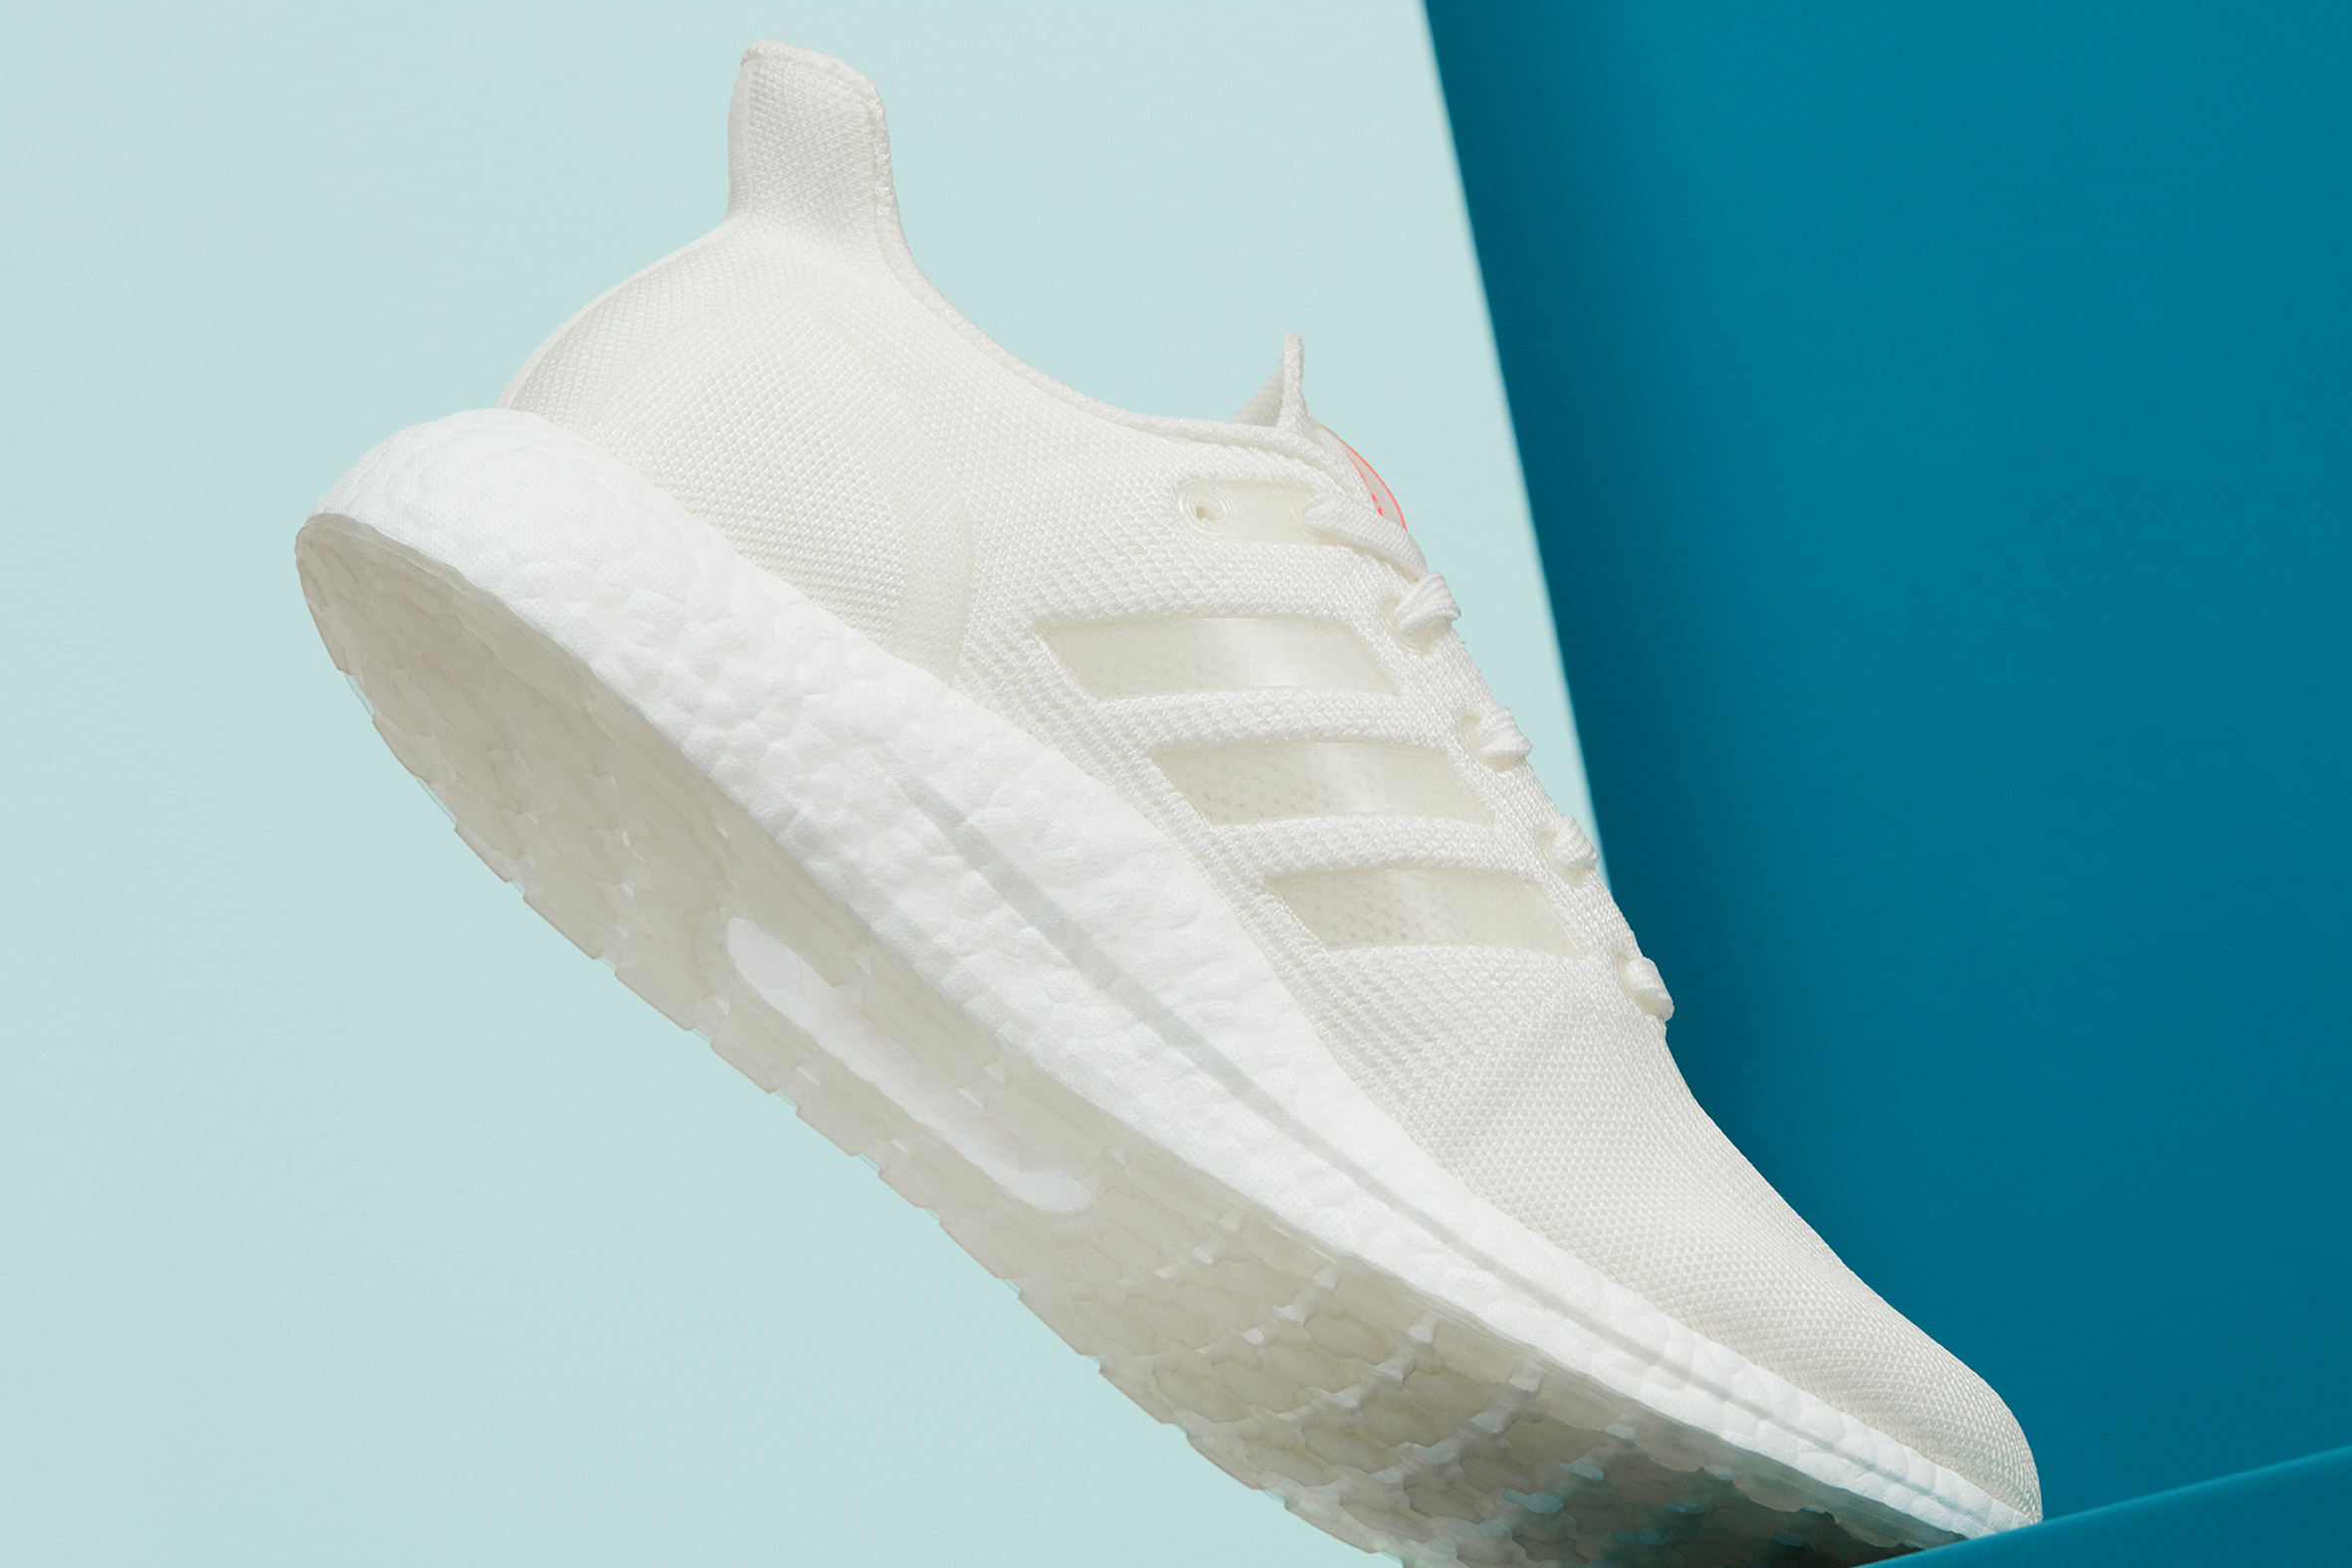 Adidas trials trainer as drive "to end plastic waste"